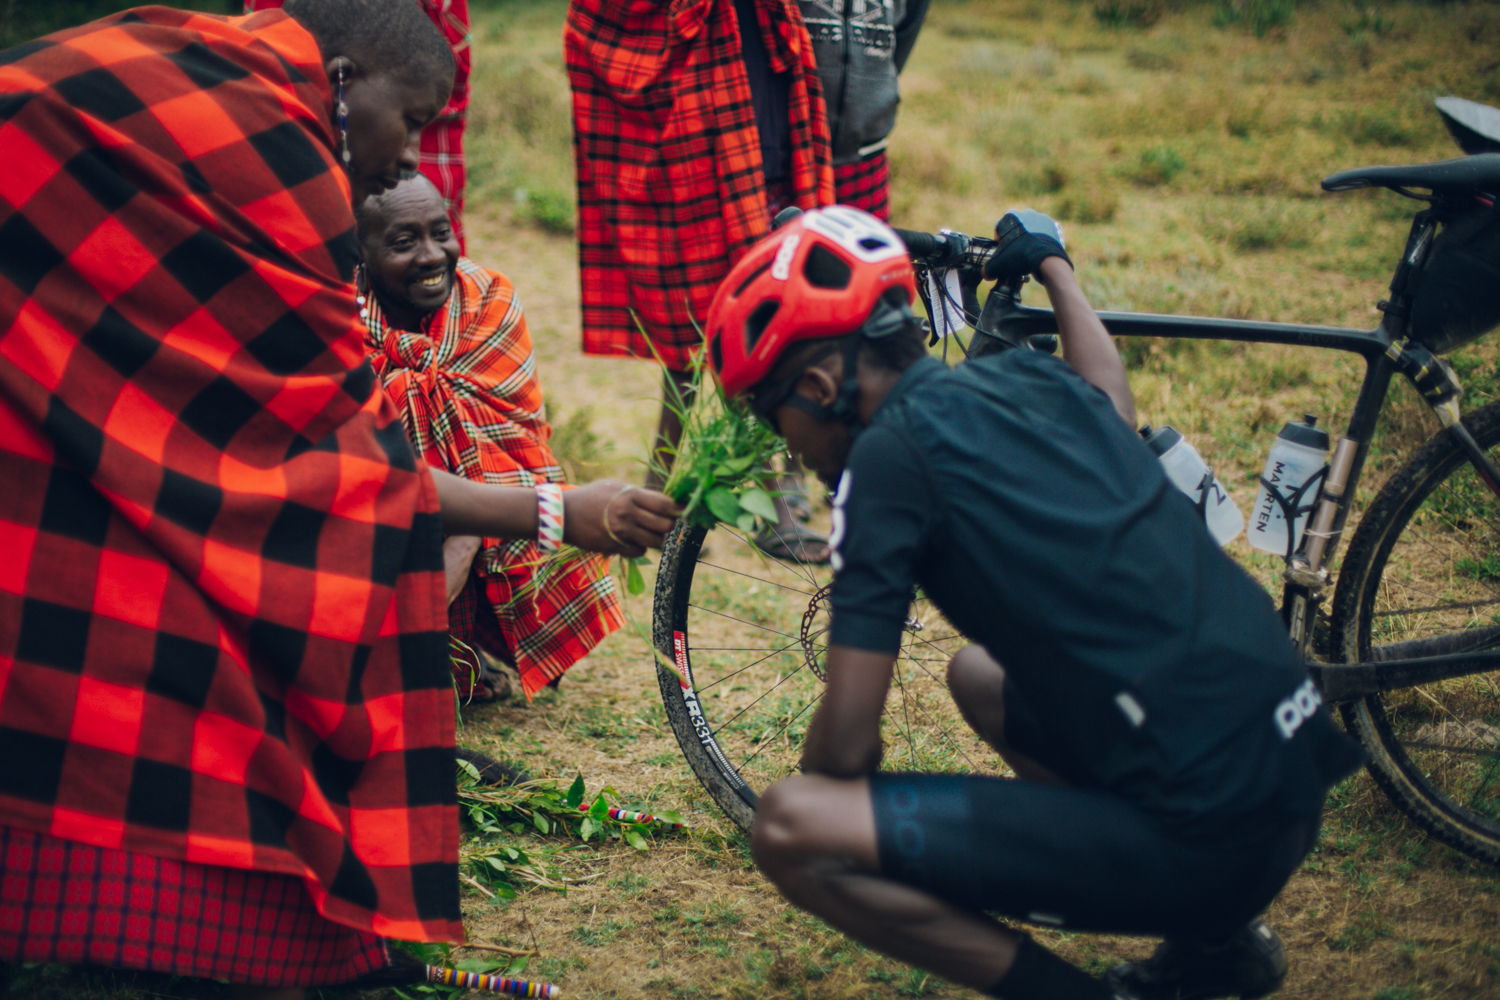 Blessing by the Maasai